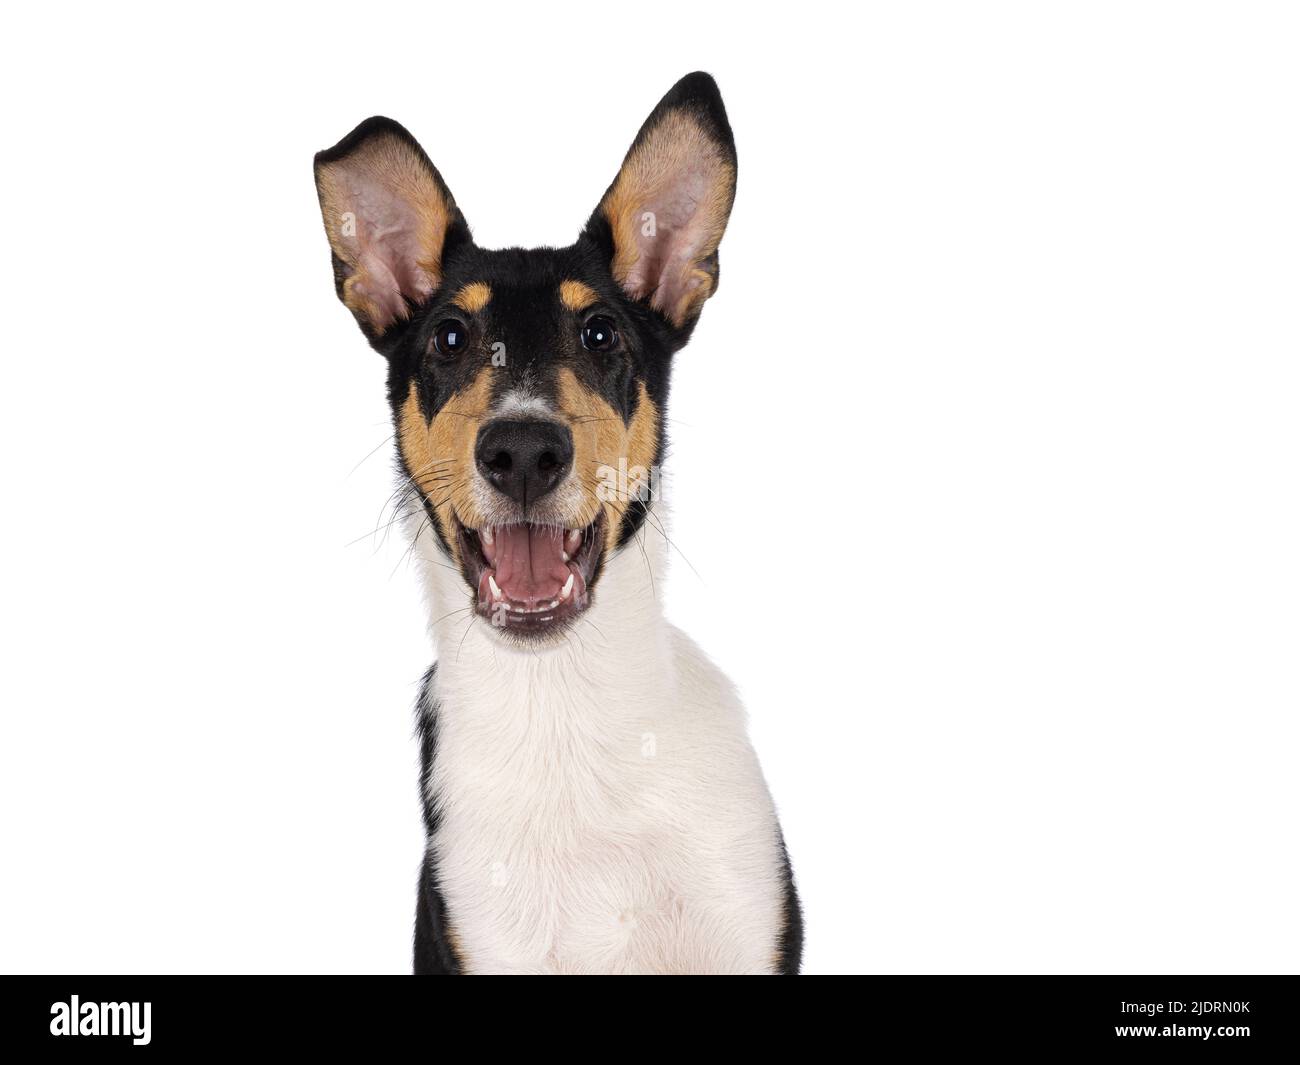 Head shot of happy young Smooth Collie dog, sitting up facing front. Looking towards camera with open mouth. Isolated on a white background. Stock Photo